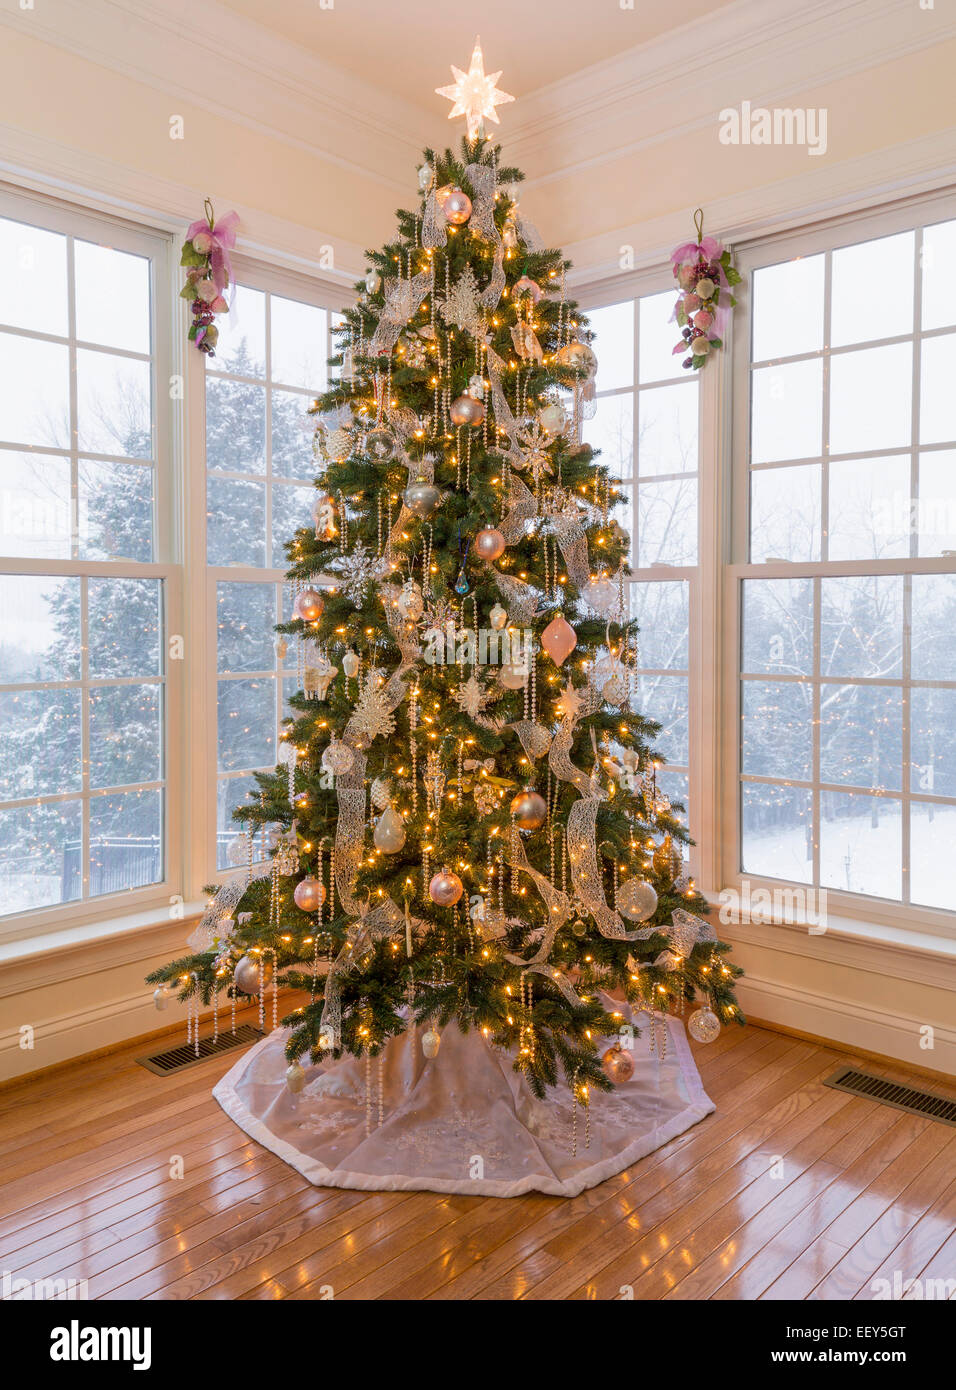 Christmas tree in modern home with snow falling outside Stock Photo